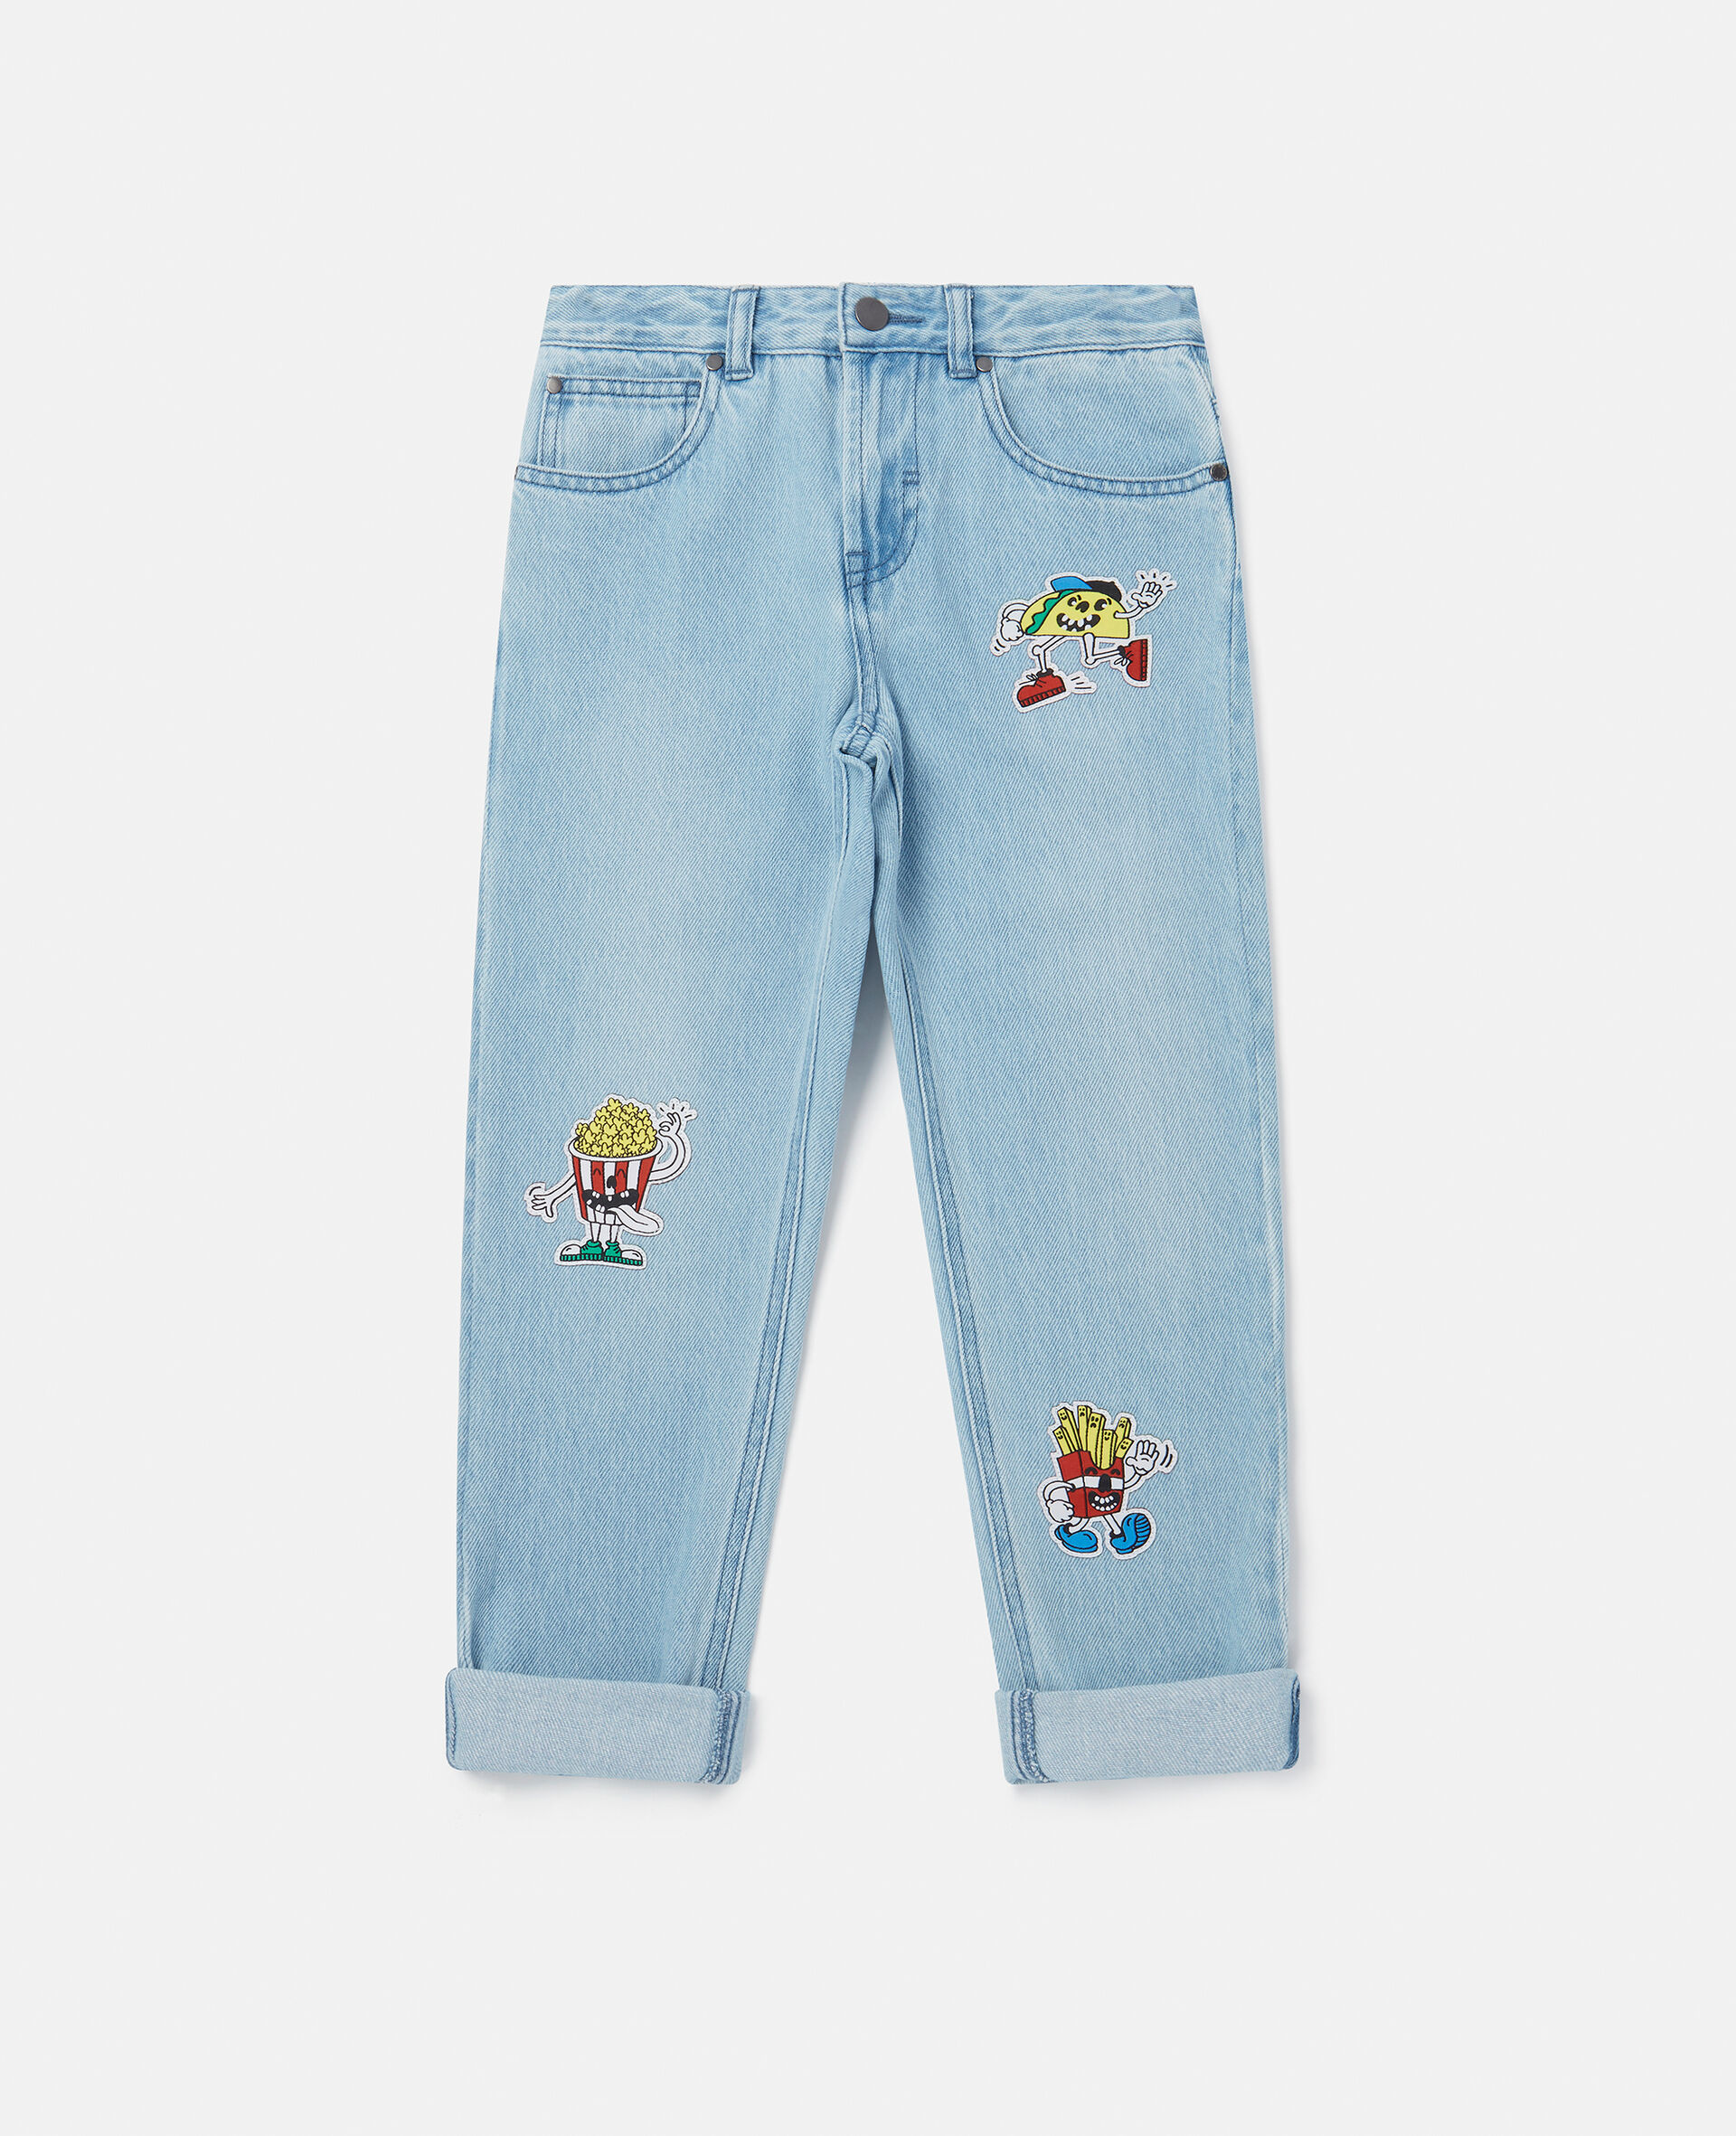 Fast Food Embroidery Boyfriend Jeans-Multicolour-large image number 0